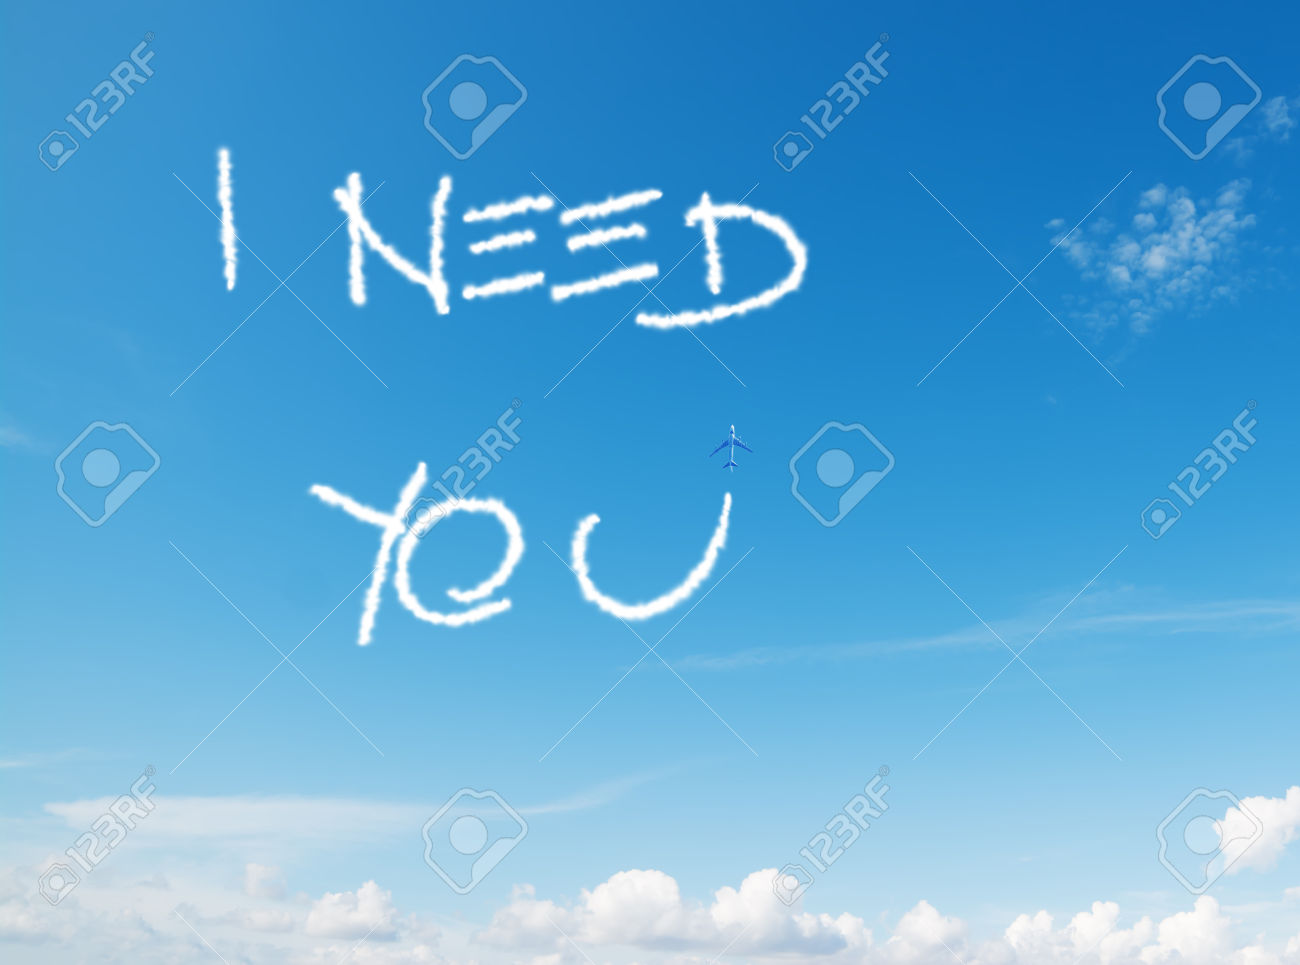 I Need You Clouds Picture